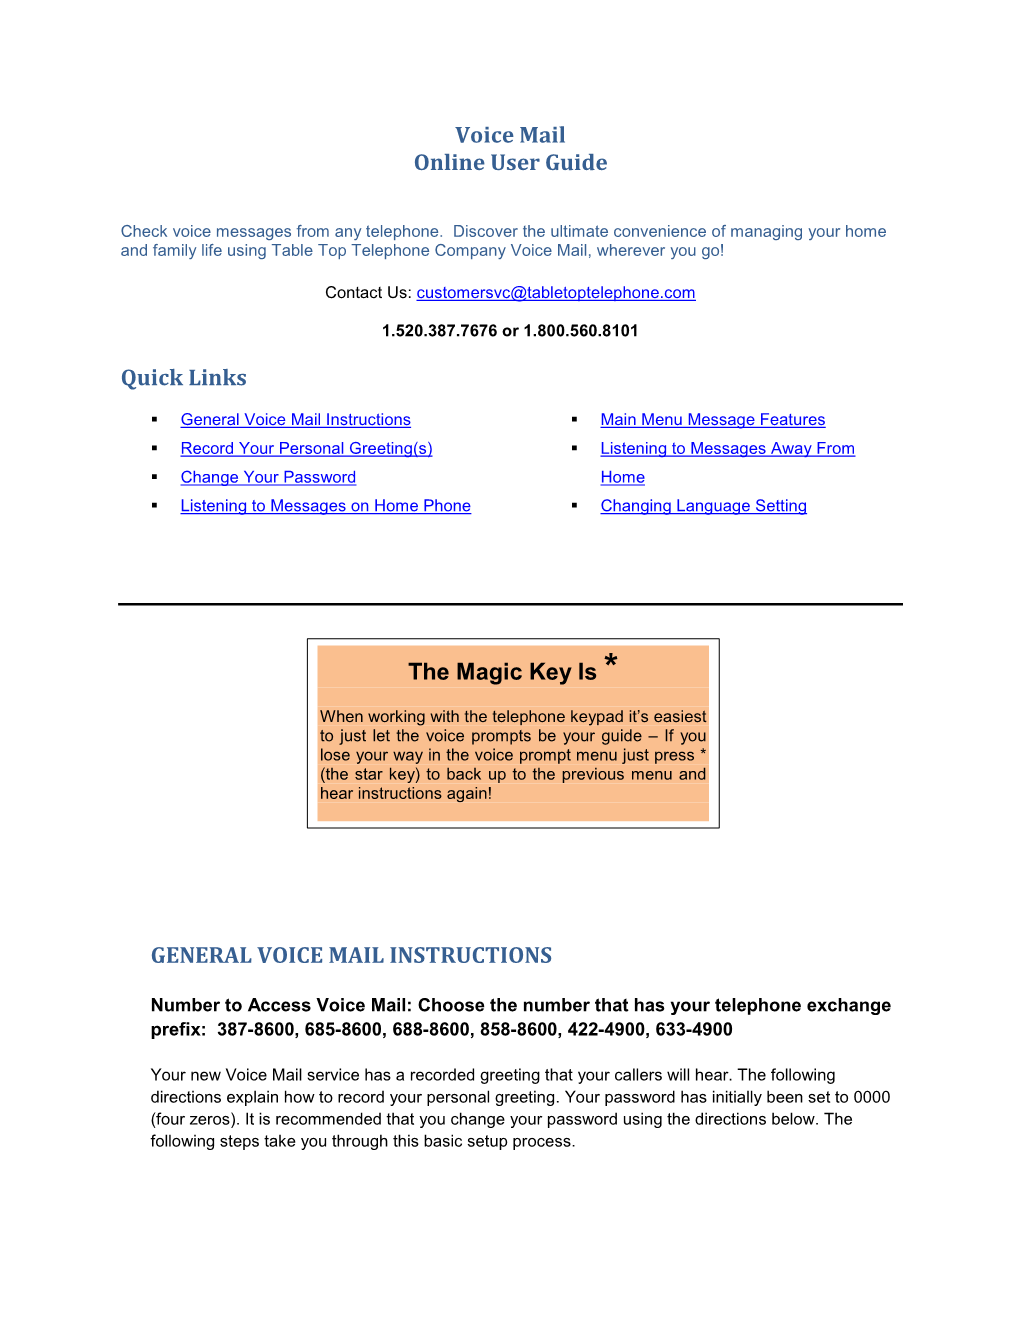 Voice Mail User Guide